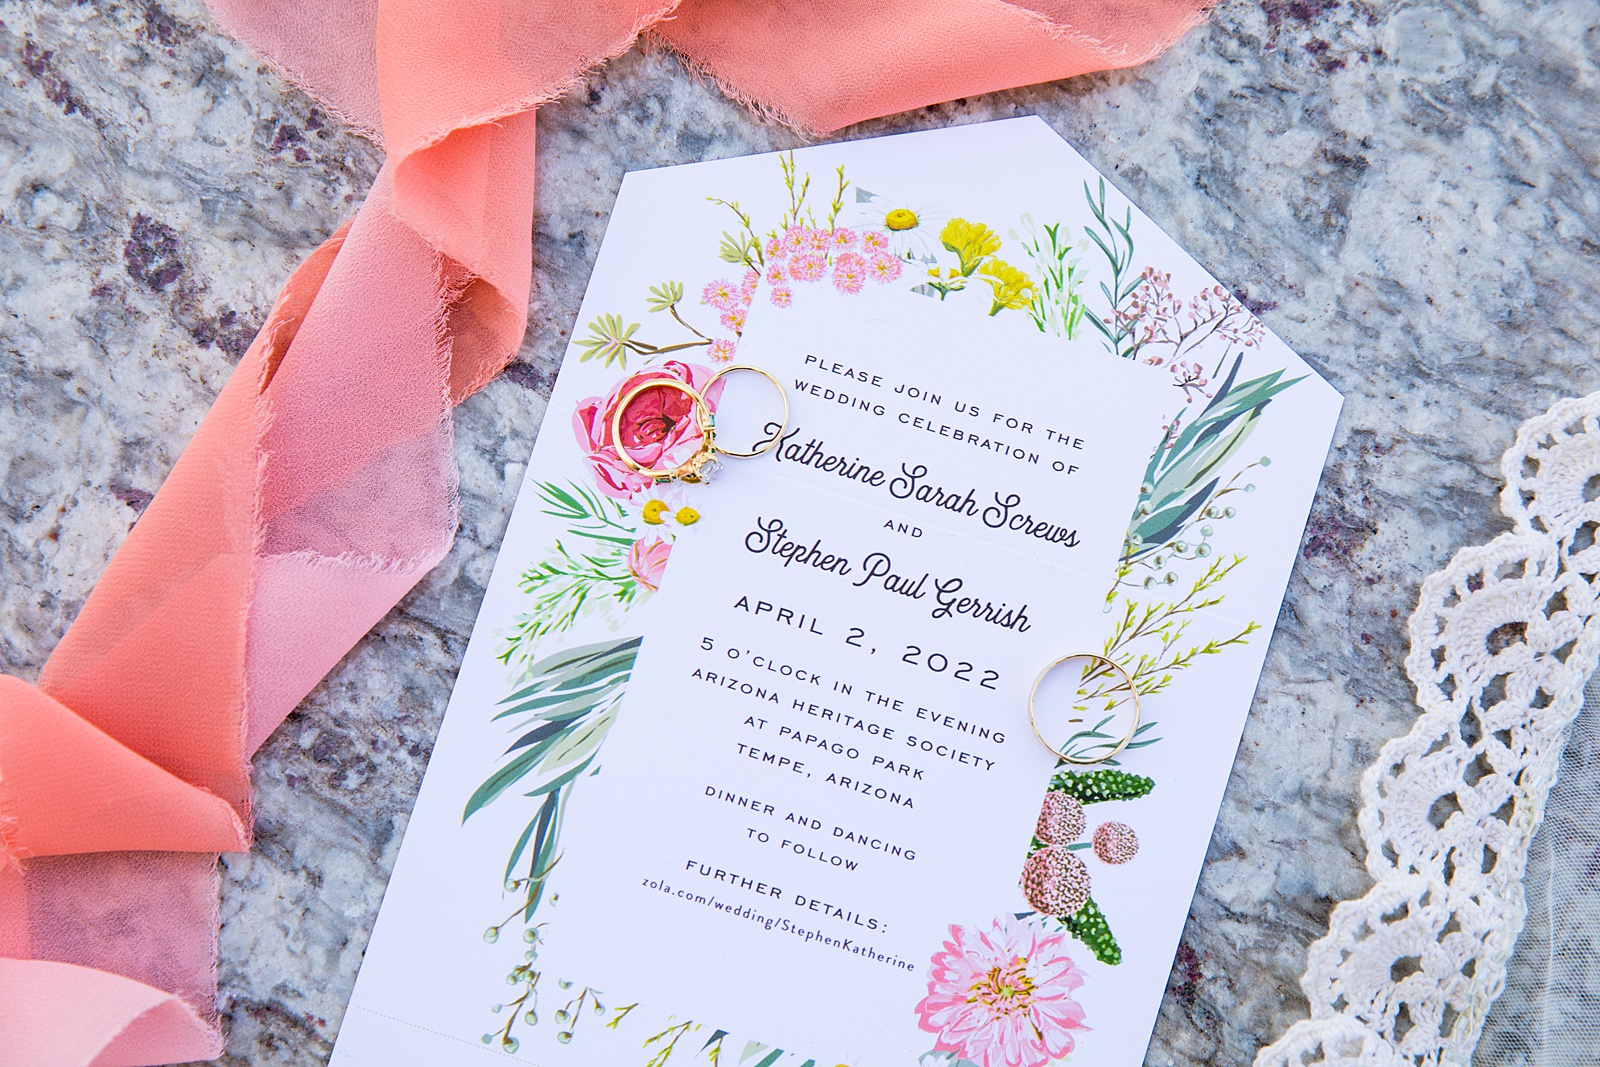 Brides's wedding day details of invitation and rings by PMA Photography.